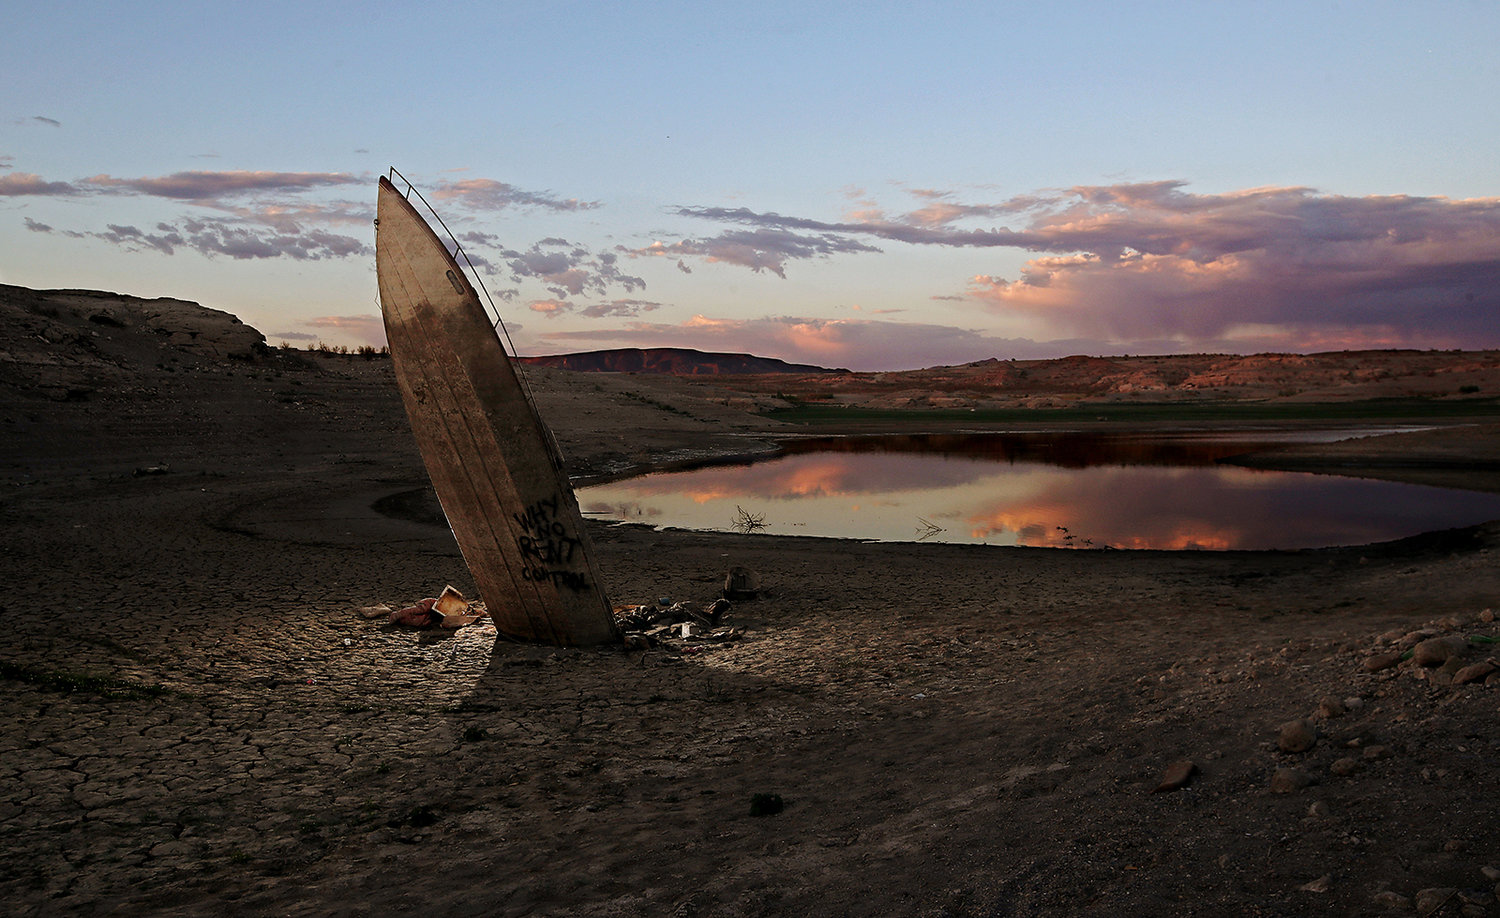 A boat that sank in Lake Mead is left embedded in the dry lake bed. (Luis Sinco/Los Angeles Times/TNS)